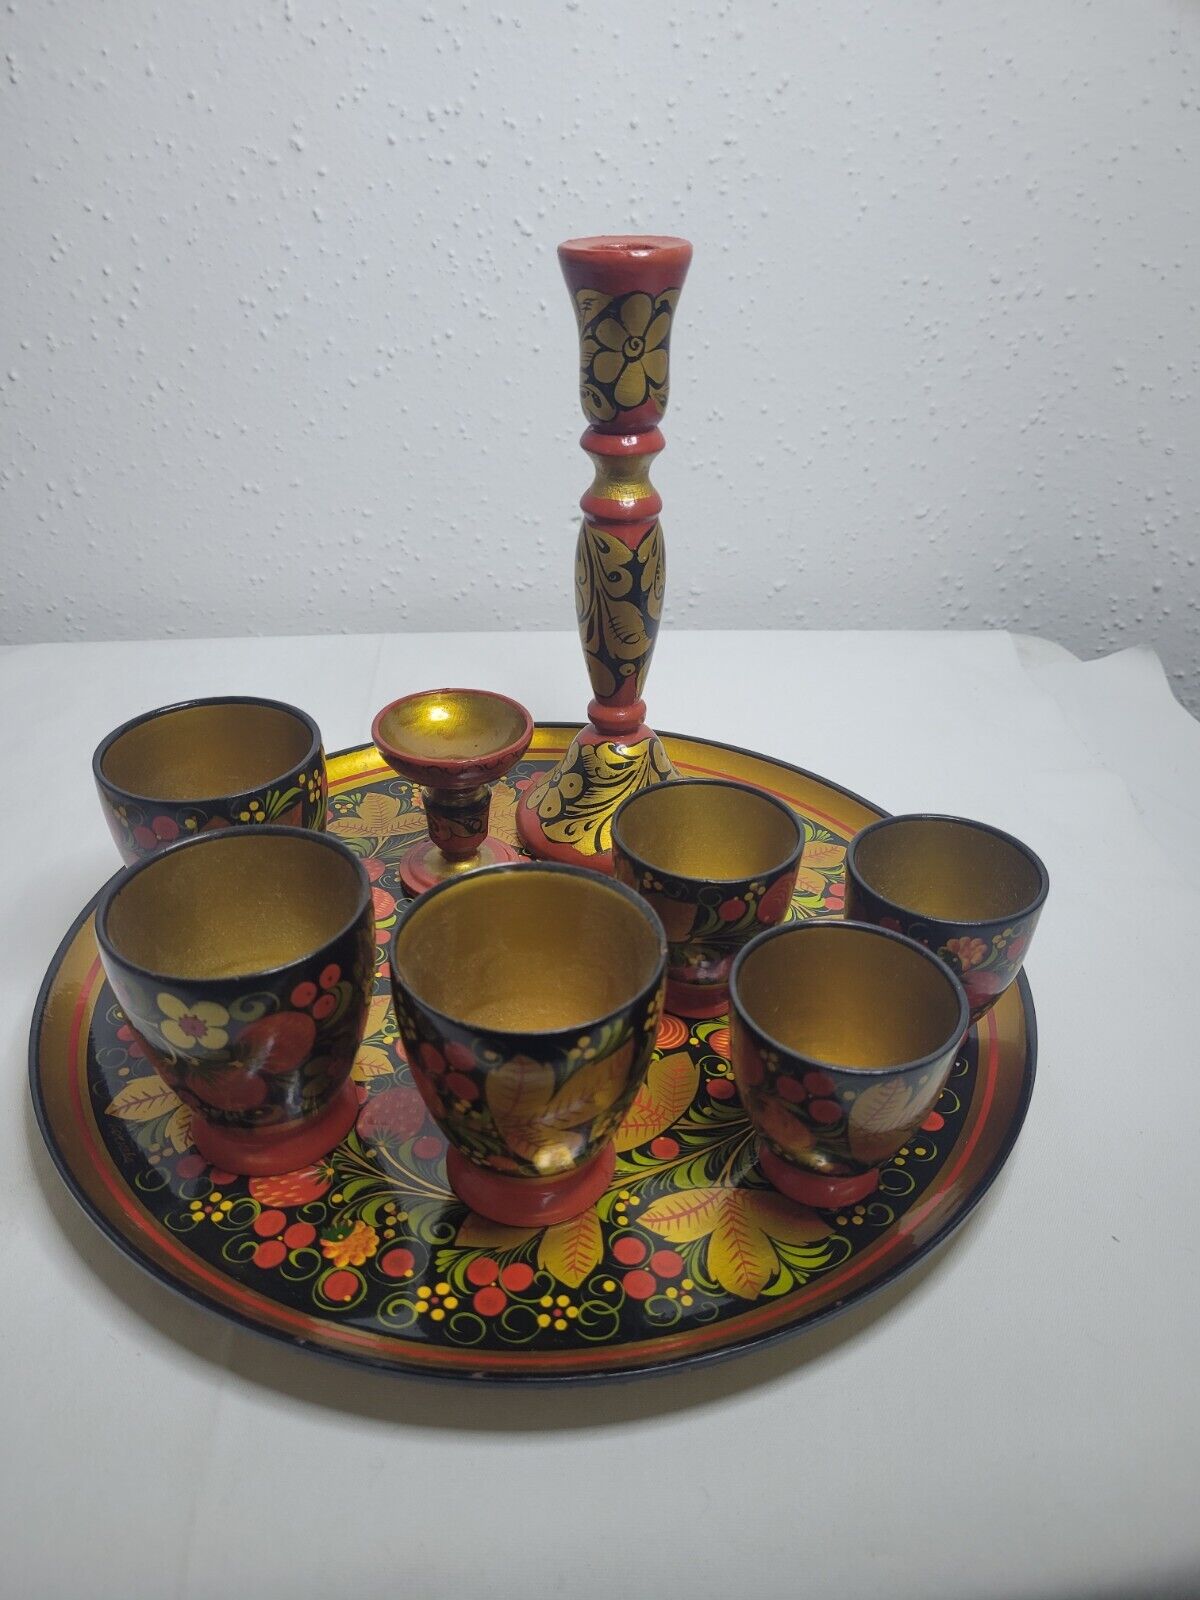 VTG~KHOKHLOMA~9 Piece WOOD TRAY/CANDLE HOLDER/CUPS Russian Design 